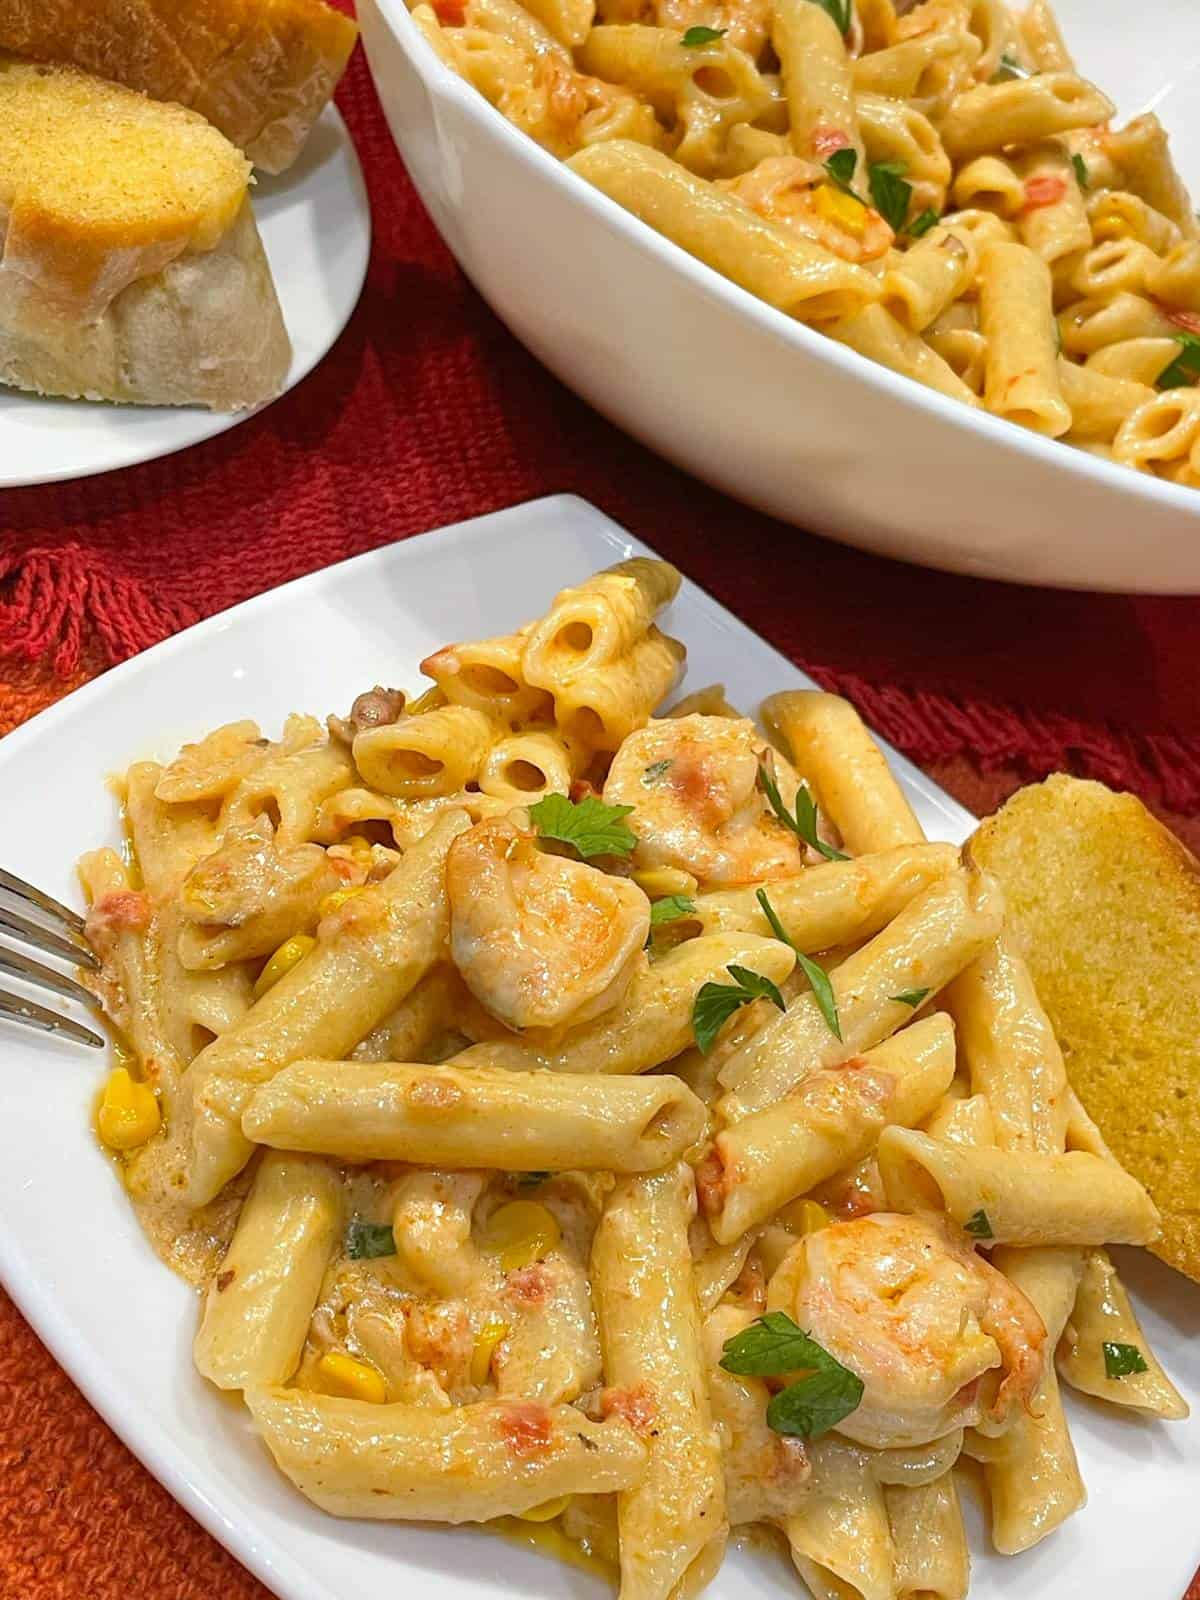 shrimp in spicy alfredo sauce with pasta on a plate with garlic bread